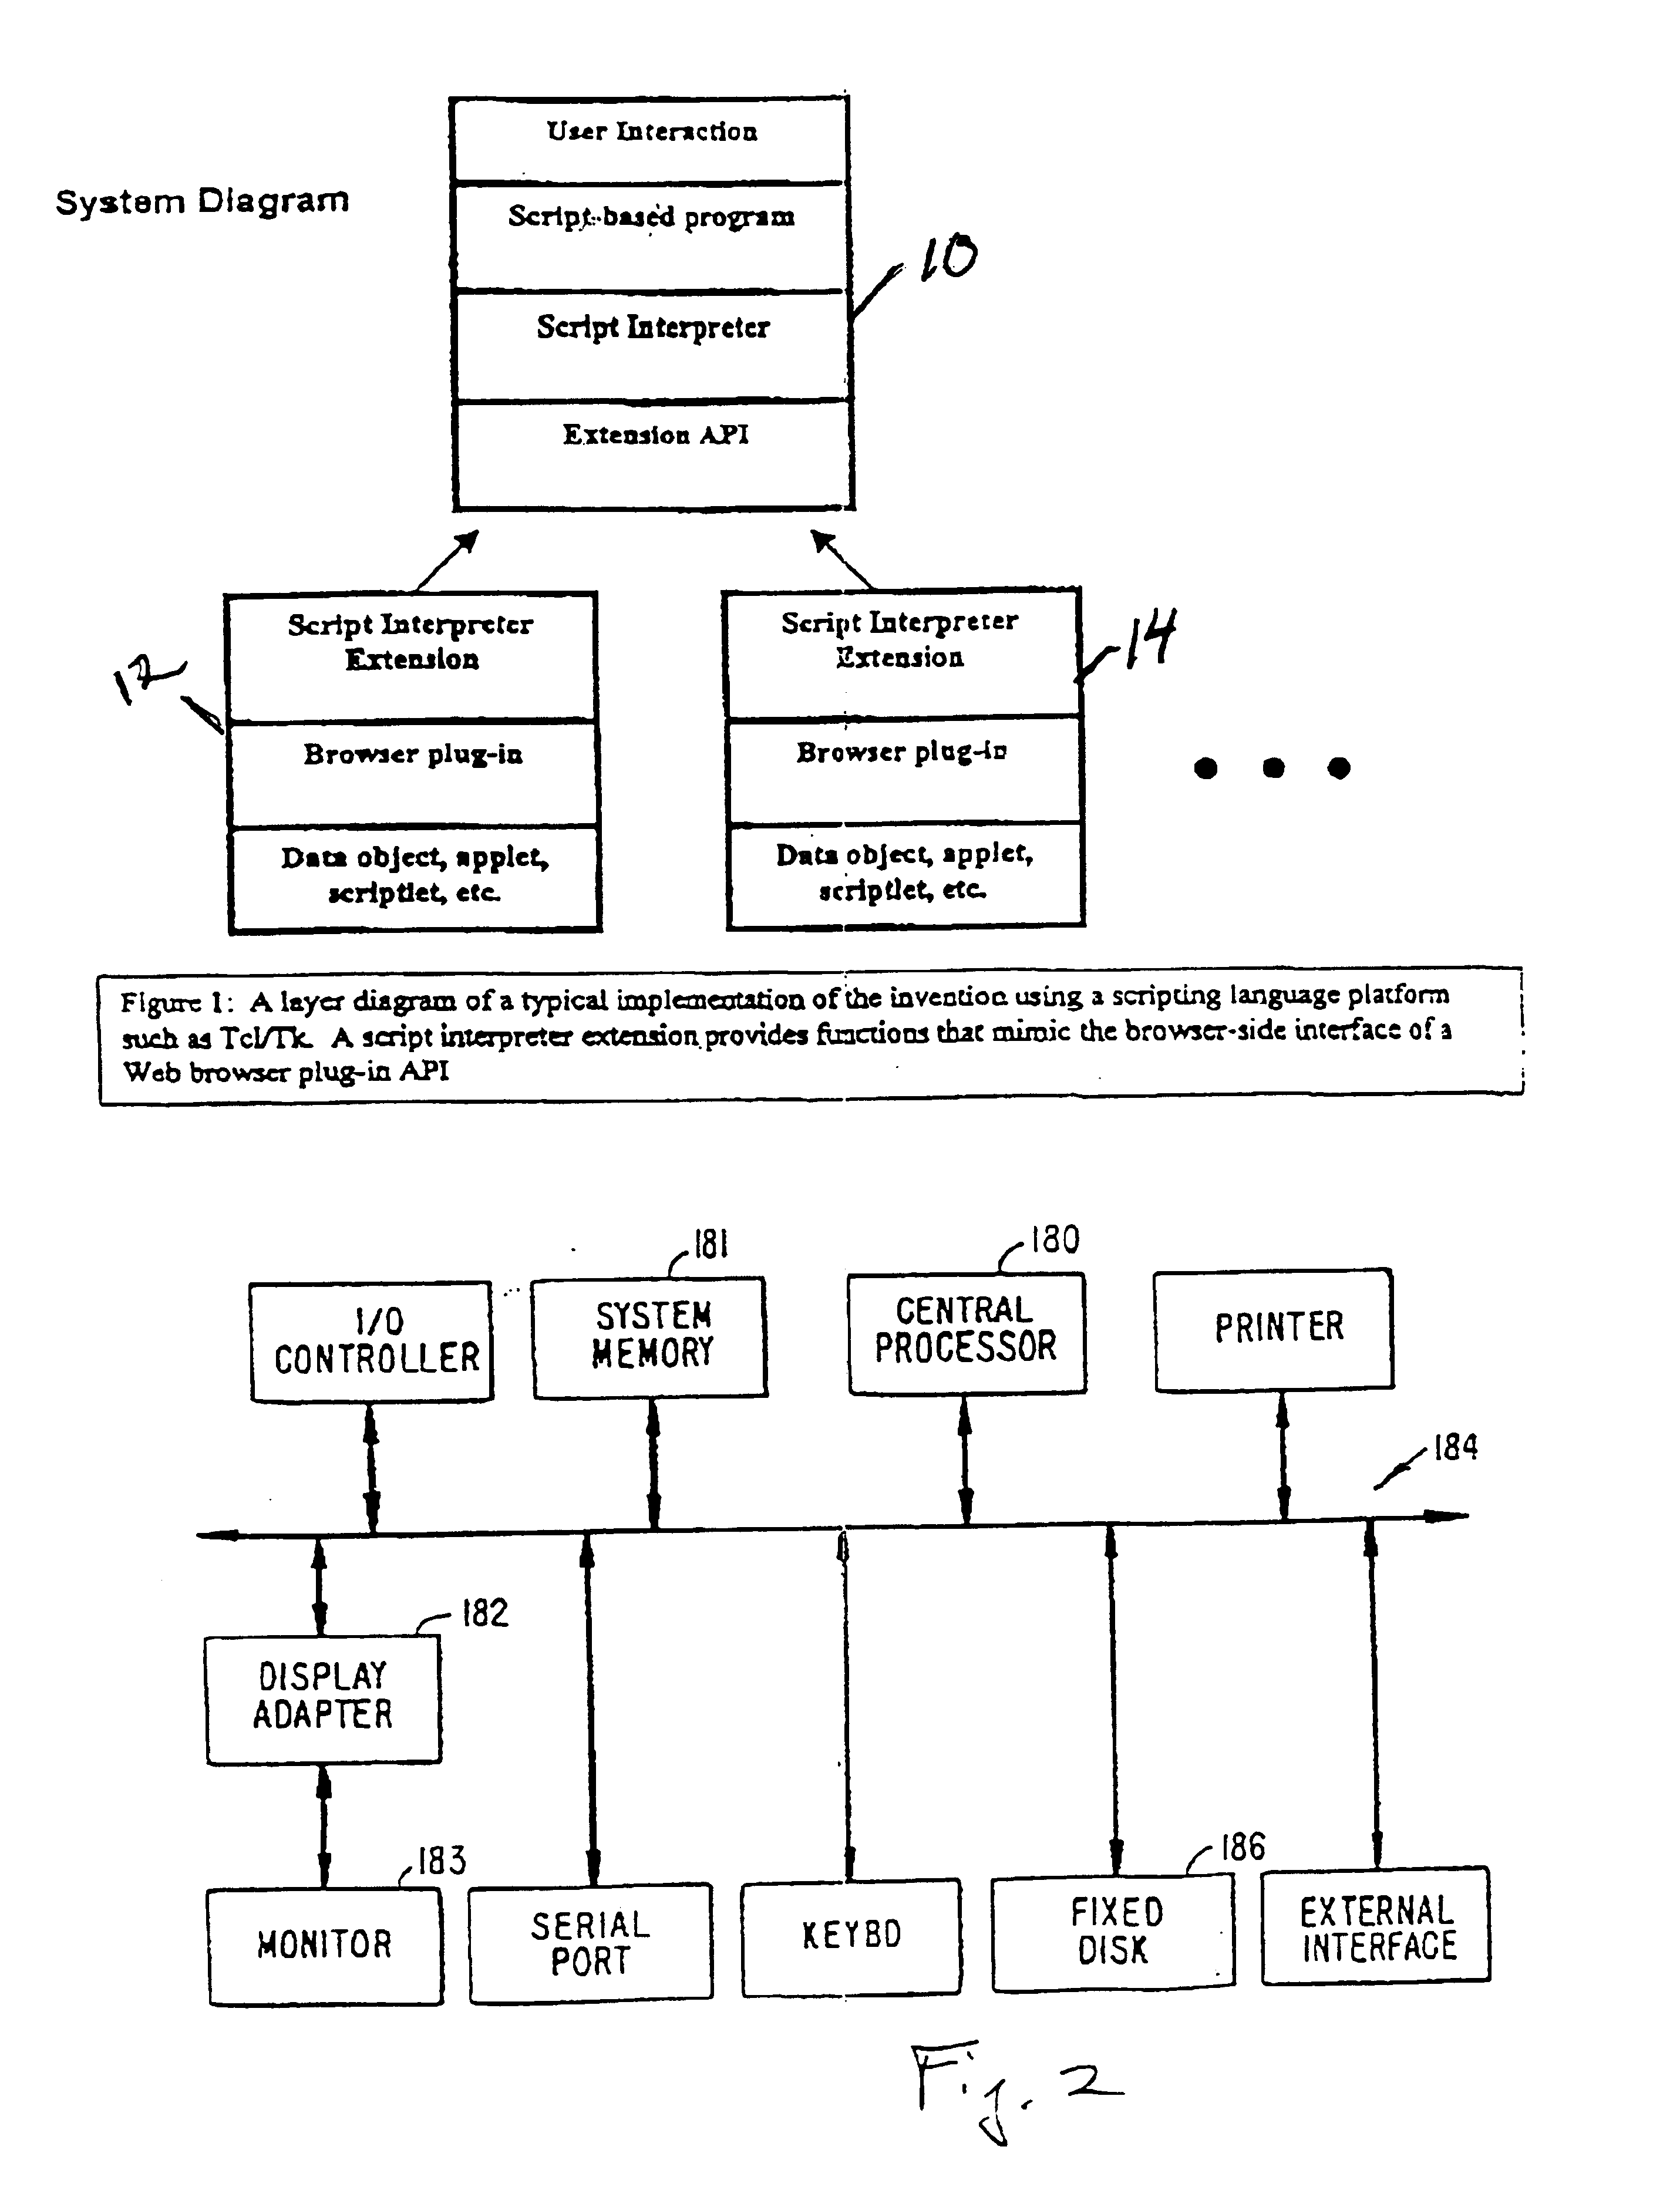 Method and system for hypermedia browser API simulation to enable use of browser plug-ins and applets as embedded widgets in script-language-based interactive programs